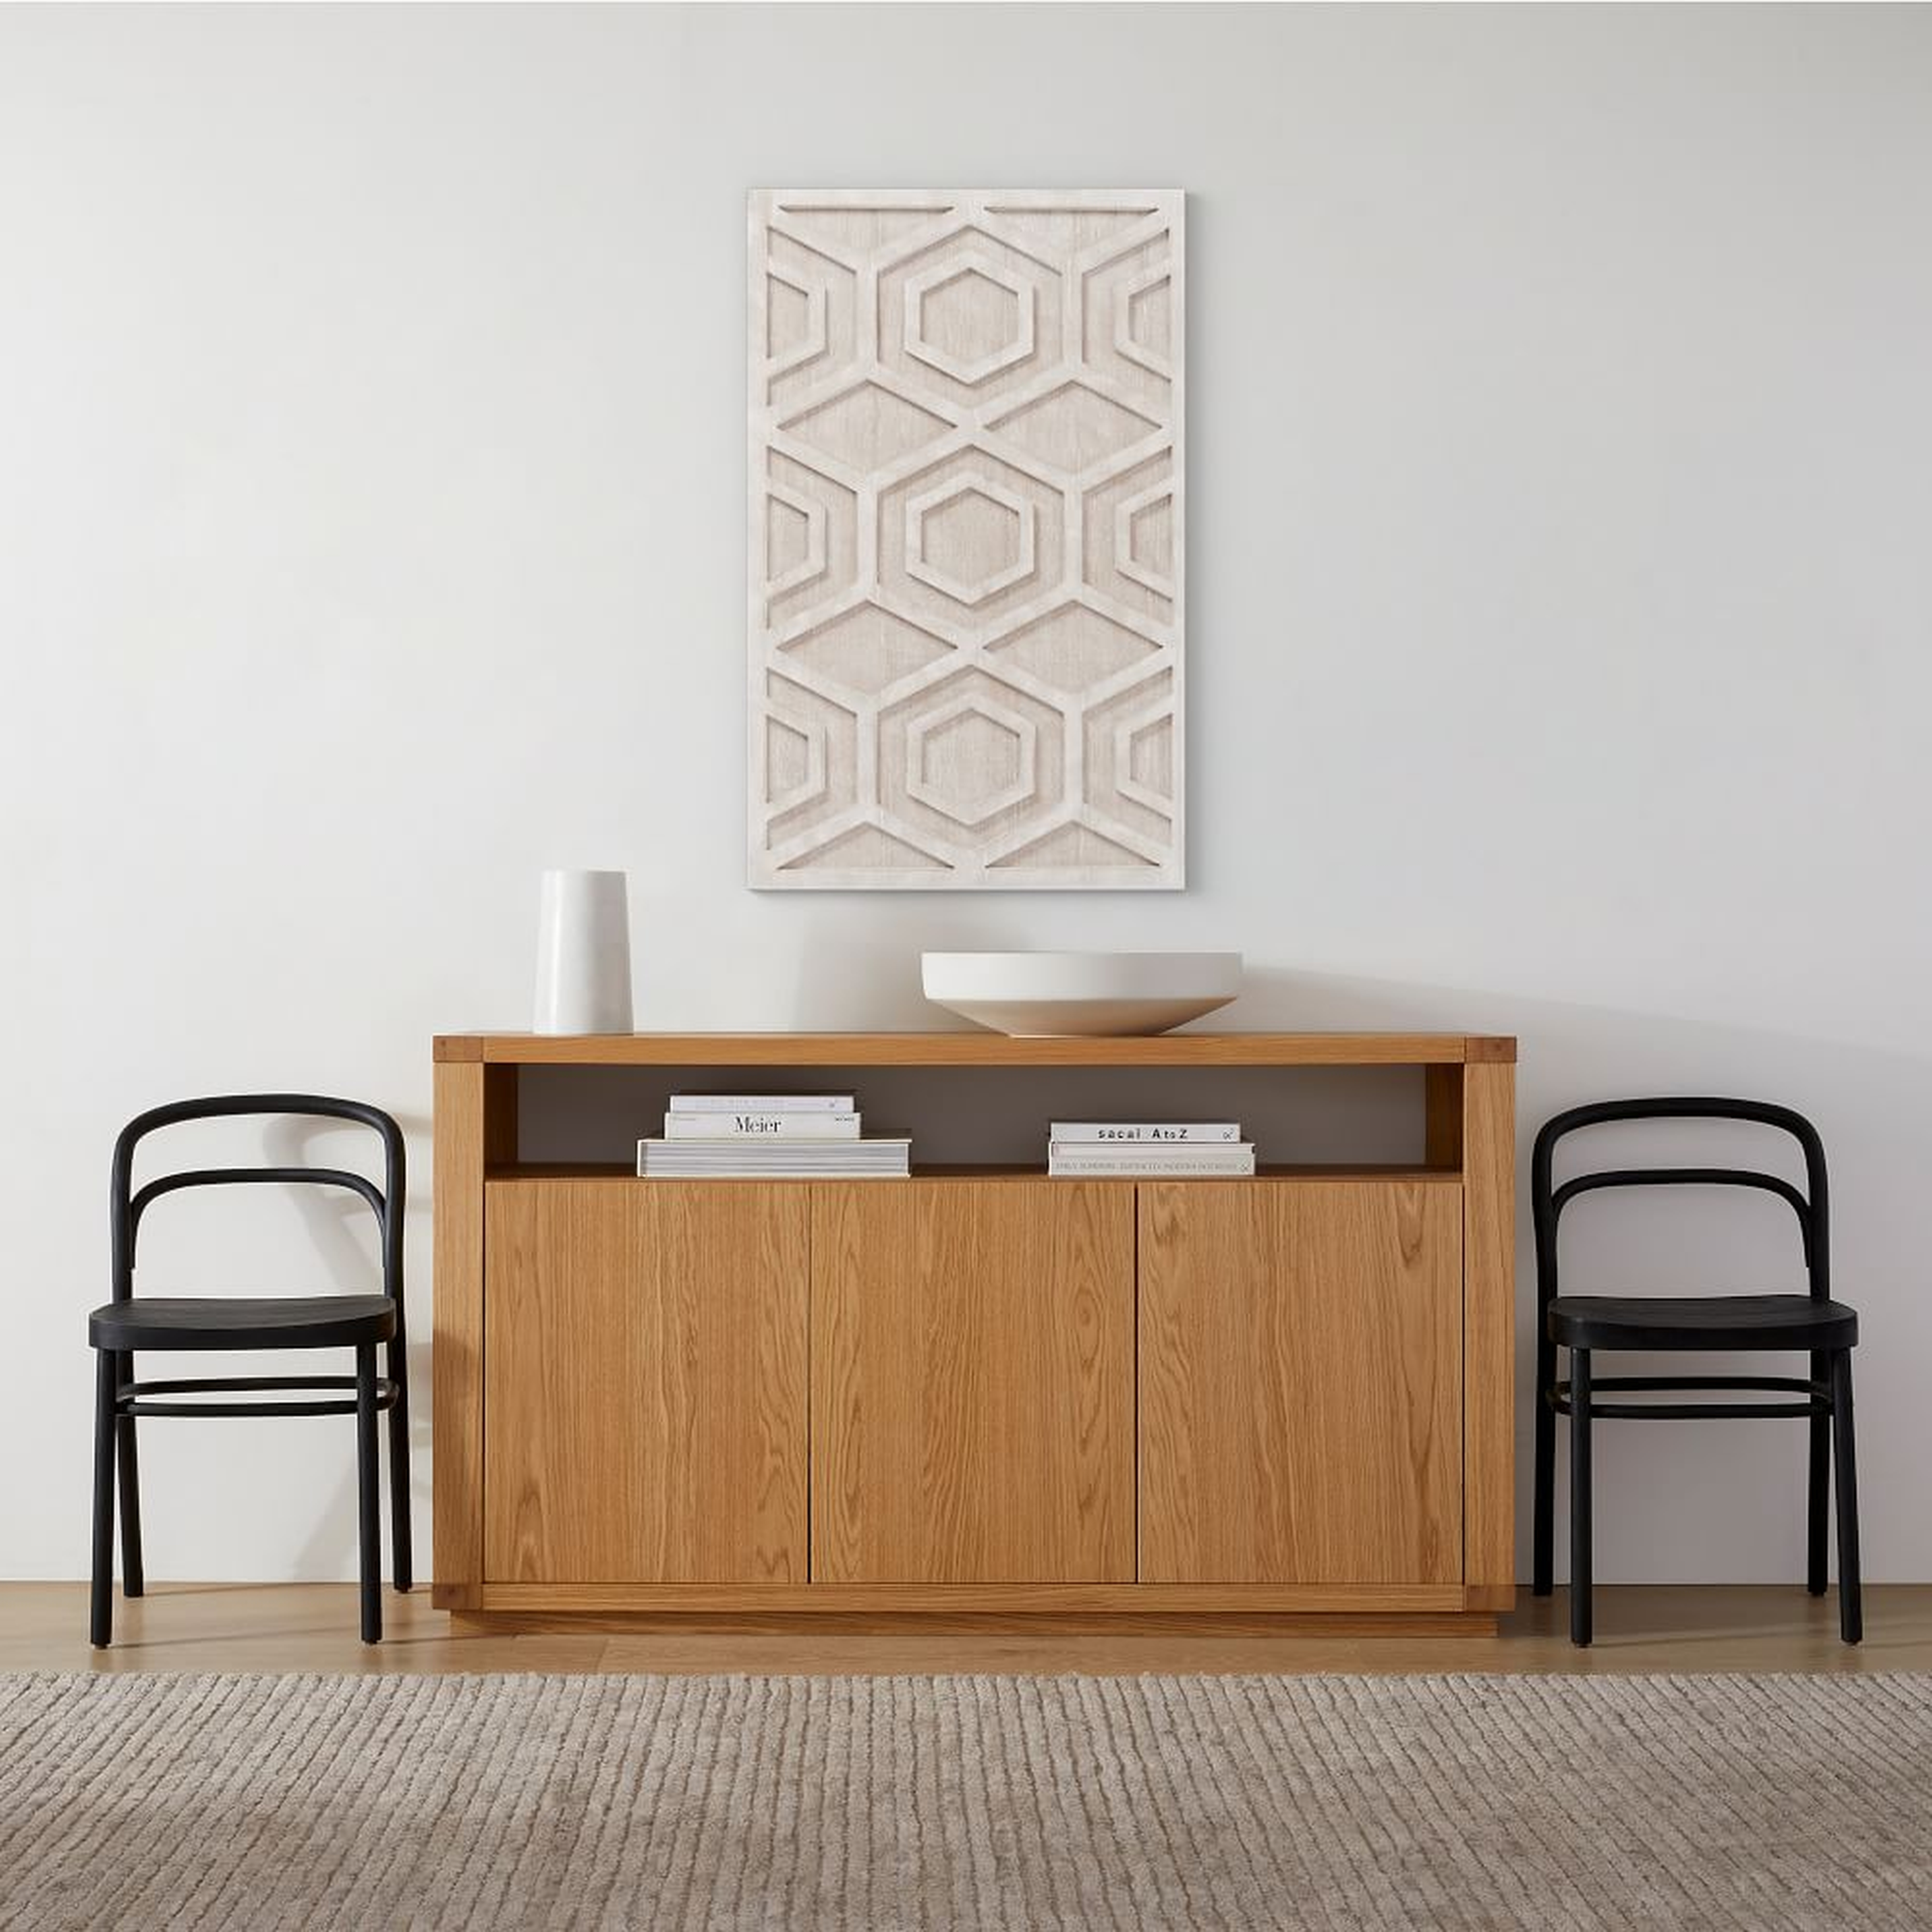 Graphic Wood Wall Art, Whitewashed, Hexagon, Individual - West Elm